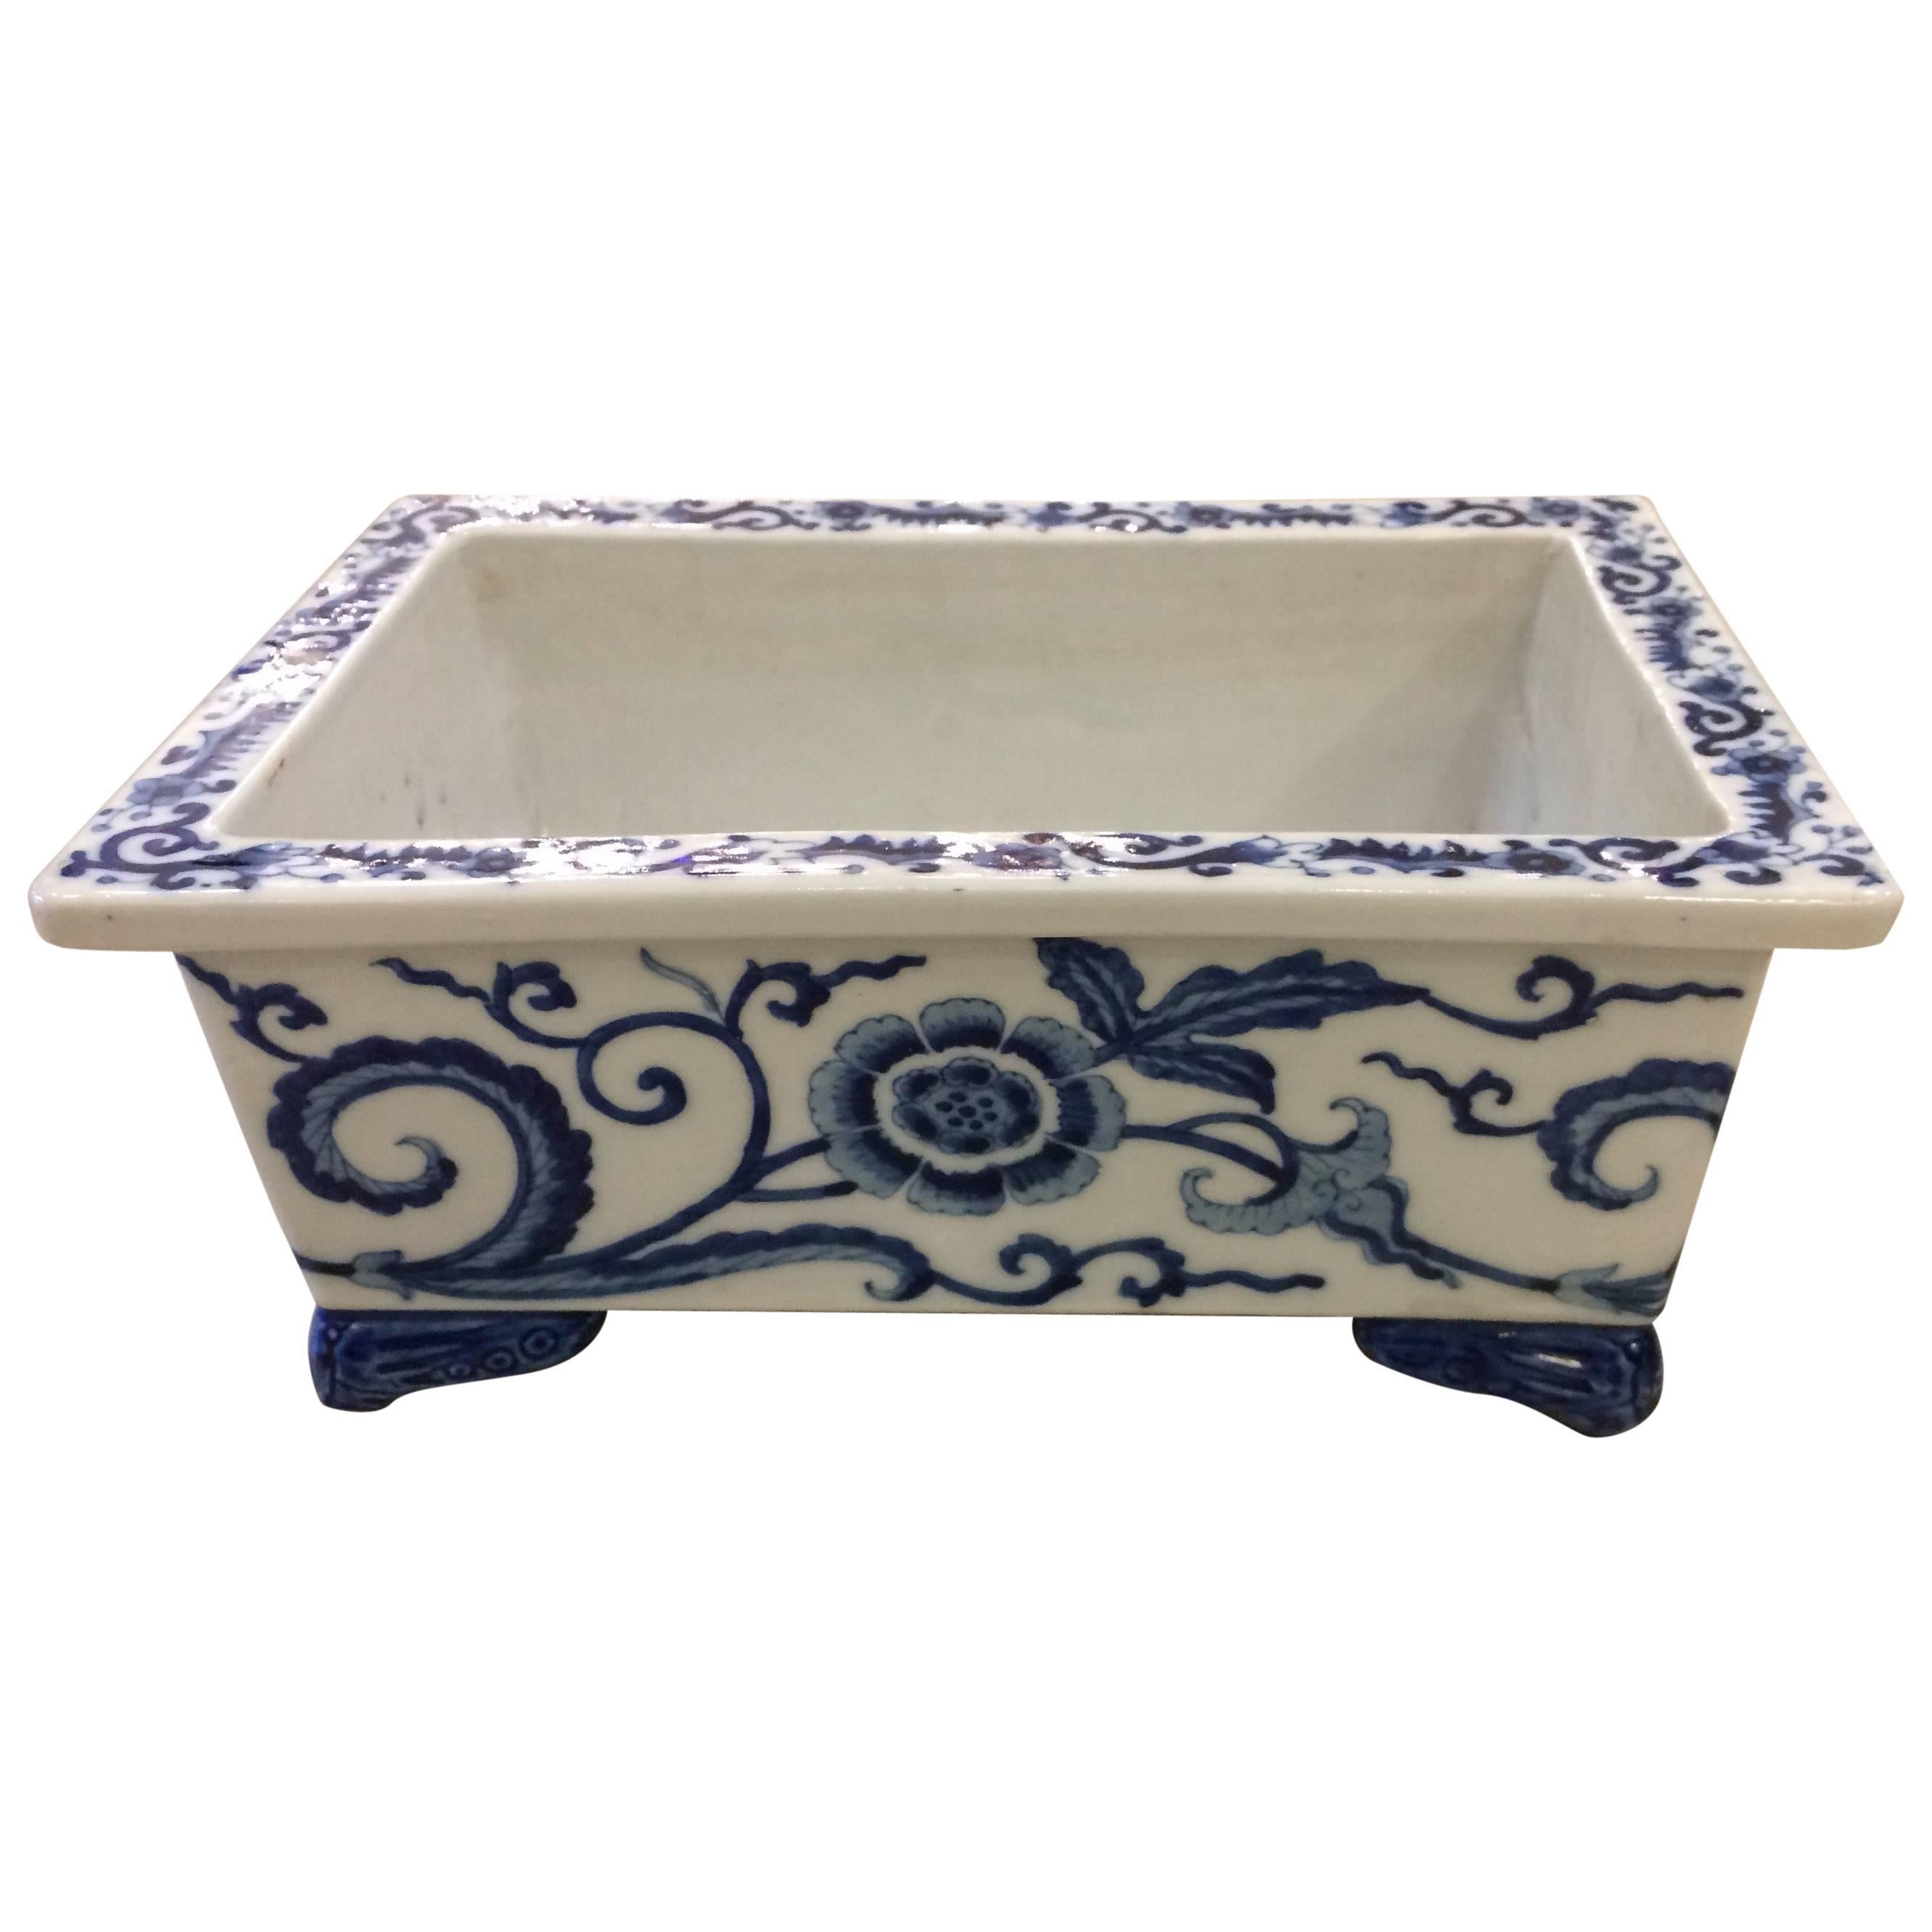 Lovely 19th Century English Blue and White Planter Jardiniere Cachepot